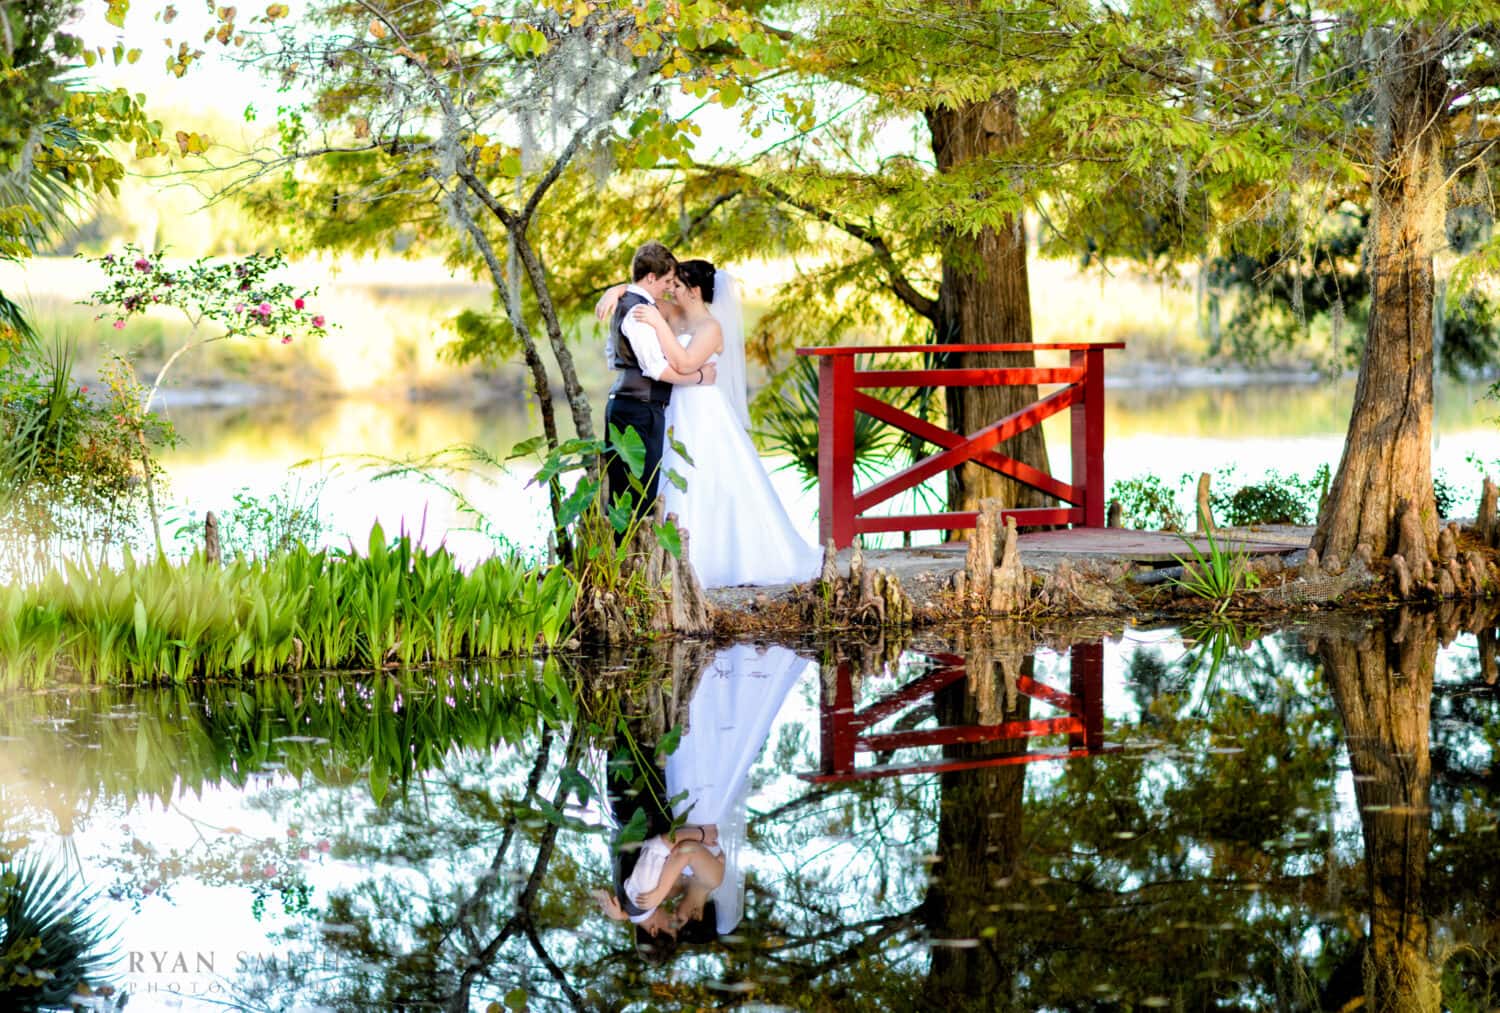 Beautiful portrait of bride and groom reflecting in the lake - Magnolia Plantation